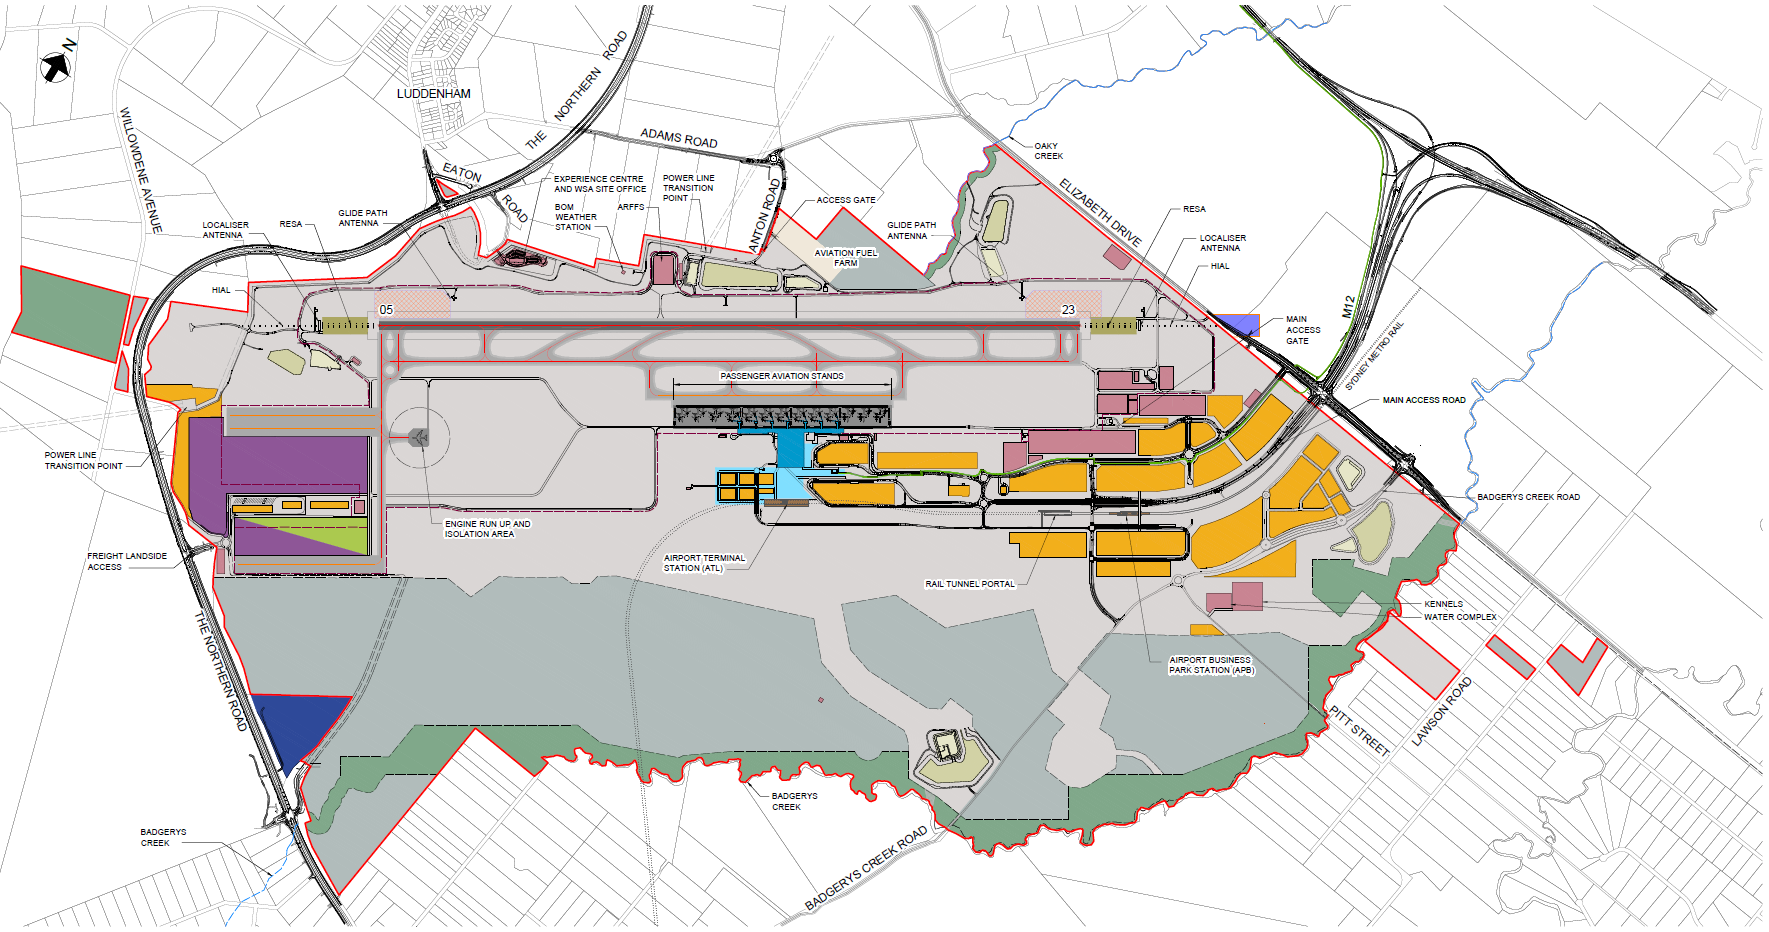 Airport site layout at 10 million annual passengers